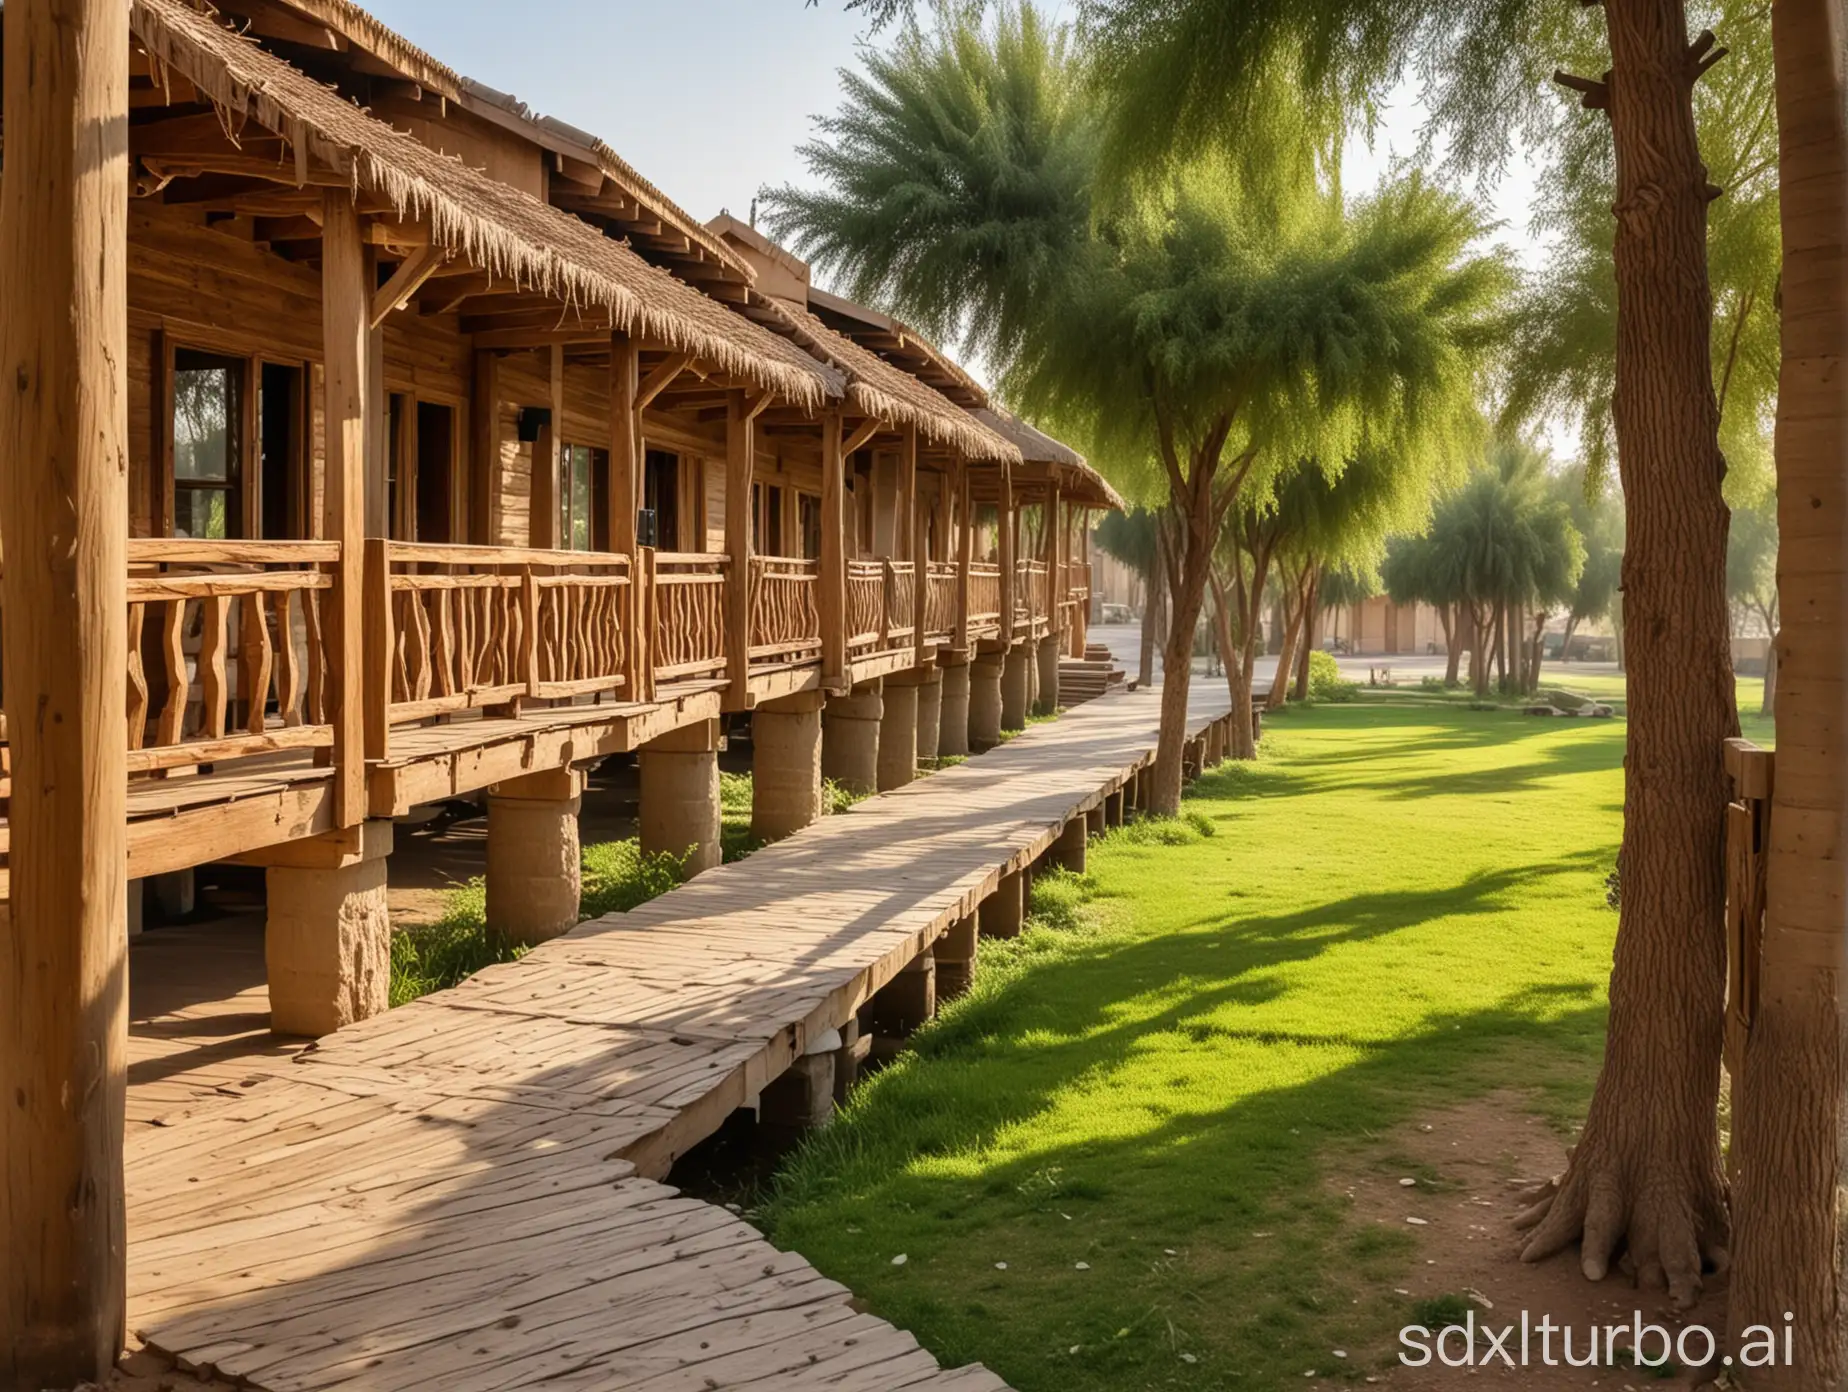 Baghdad, five tourist wood chalet on wooden columns linked between them with wooden walkway, green lawn, lush landscape, day time, sun rays